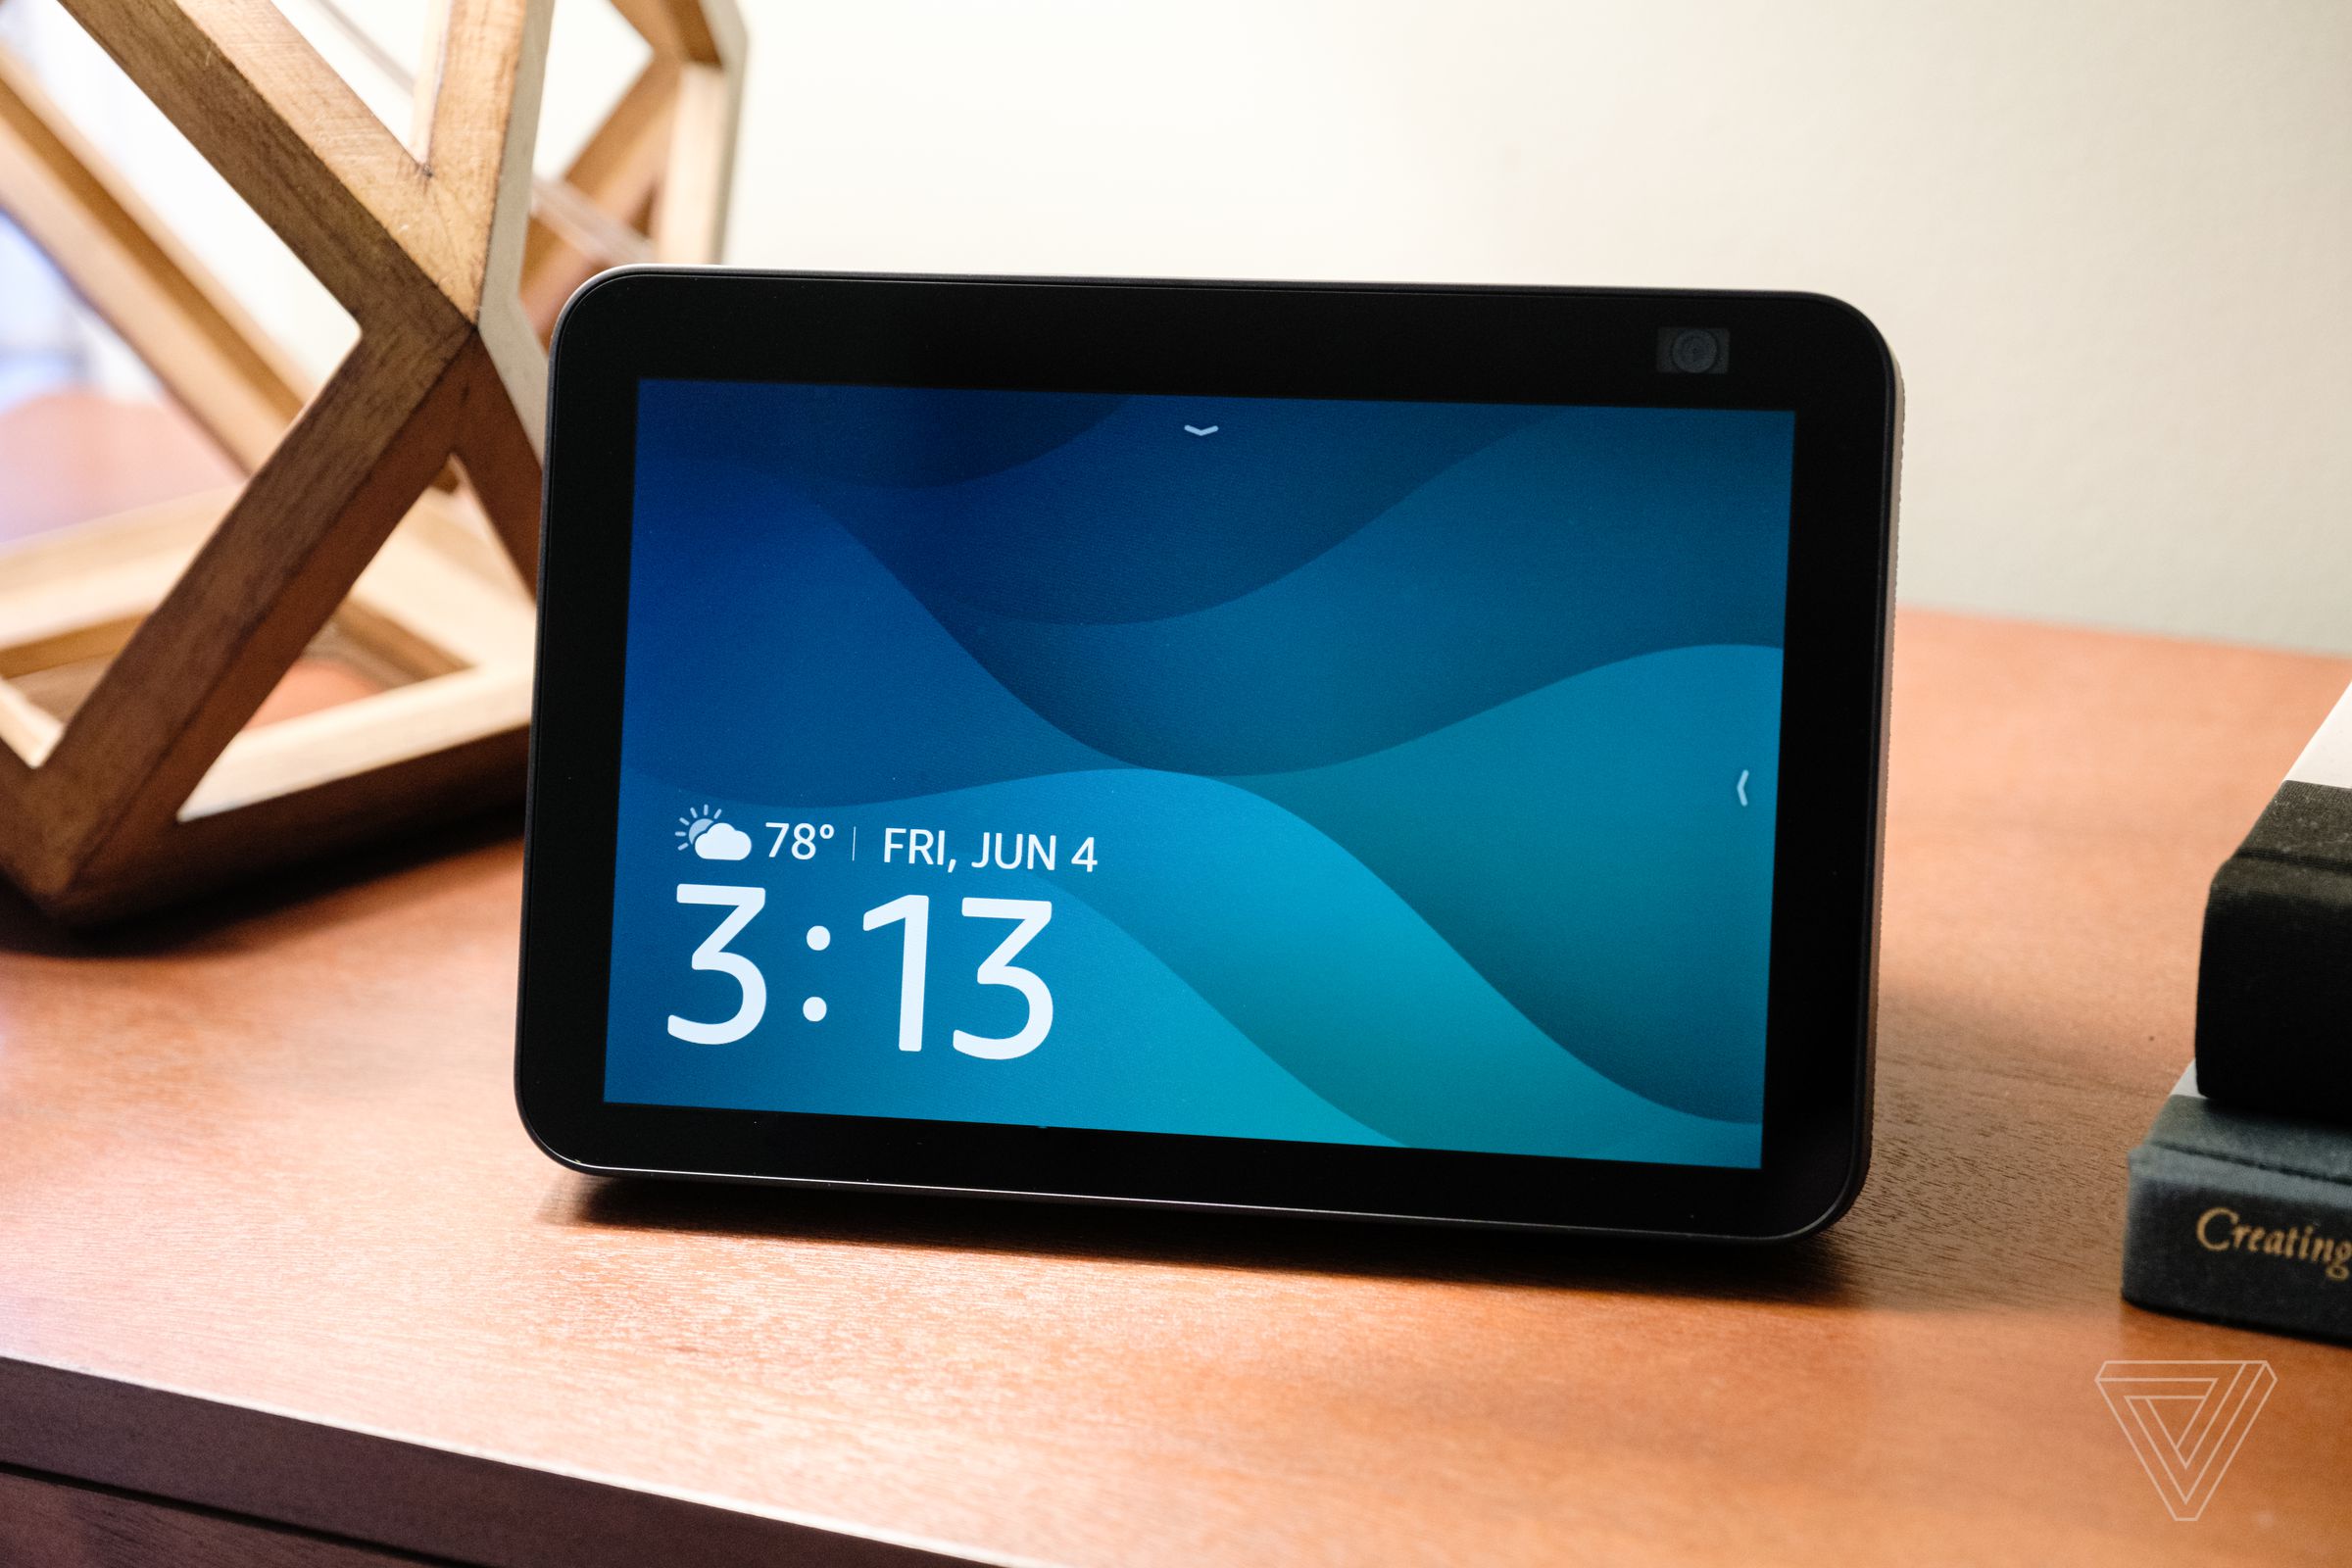 The LED light bar on the Echo Show smart displays will appear at the bottom of the screen.